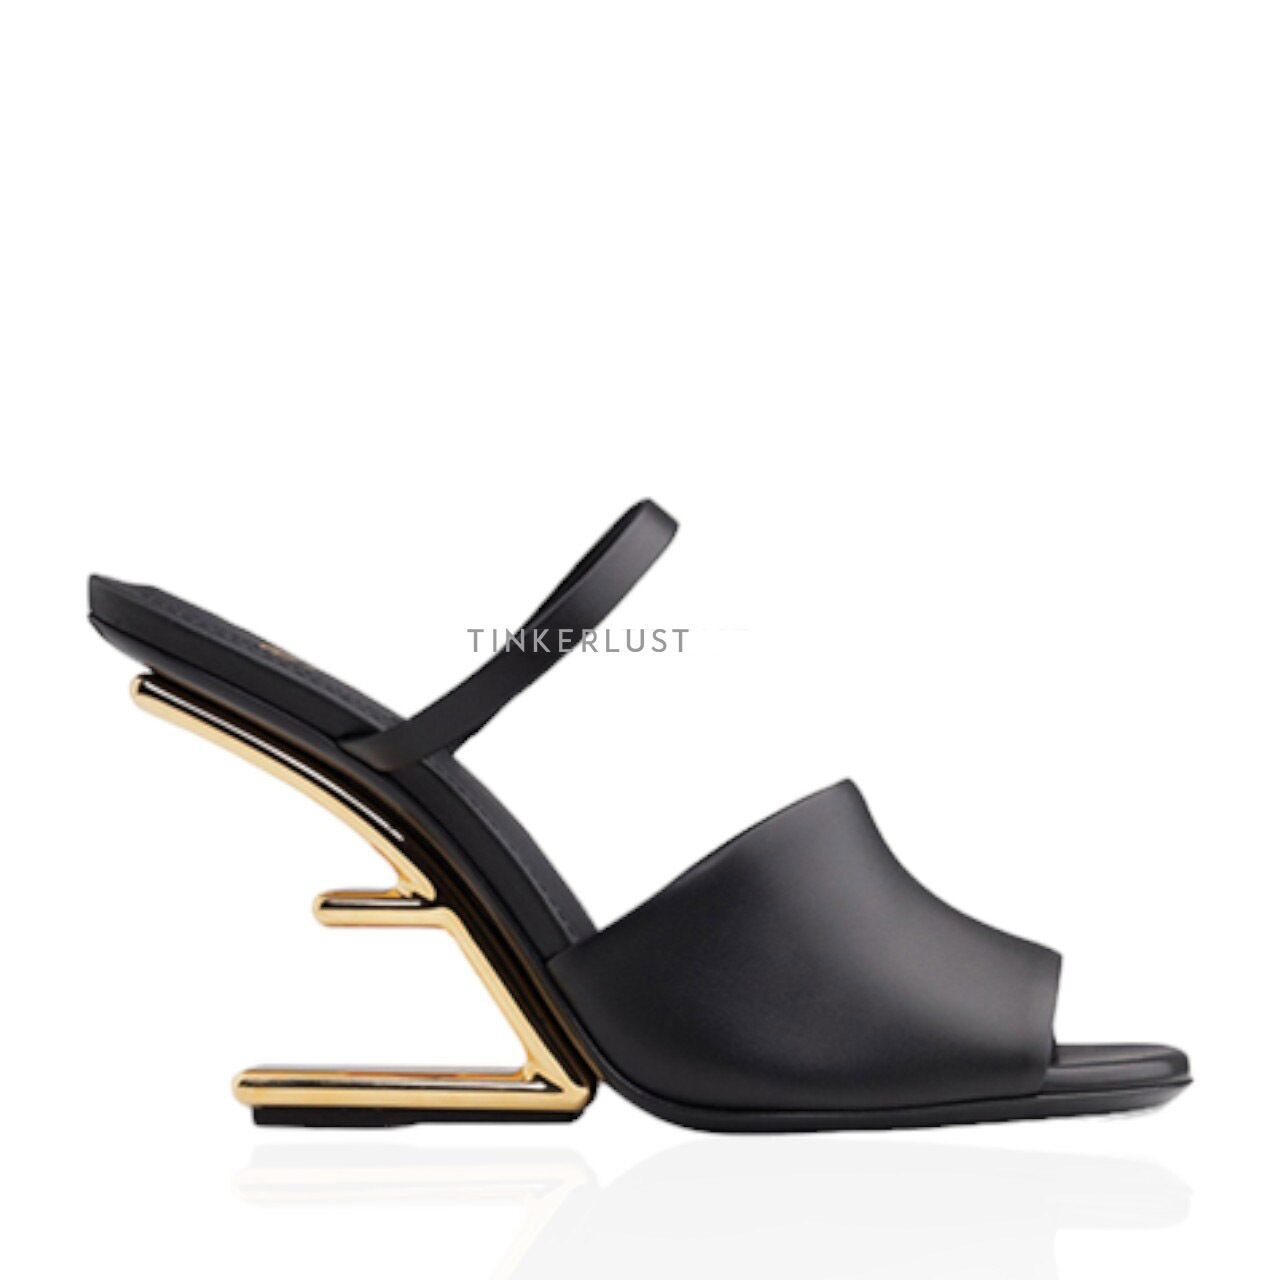 FENDI Women First Open Toe Sandals 65mm in Black Leather with Diagonal F-Shaped Heels